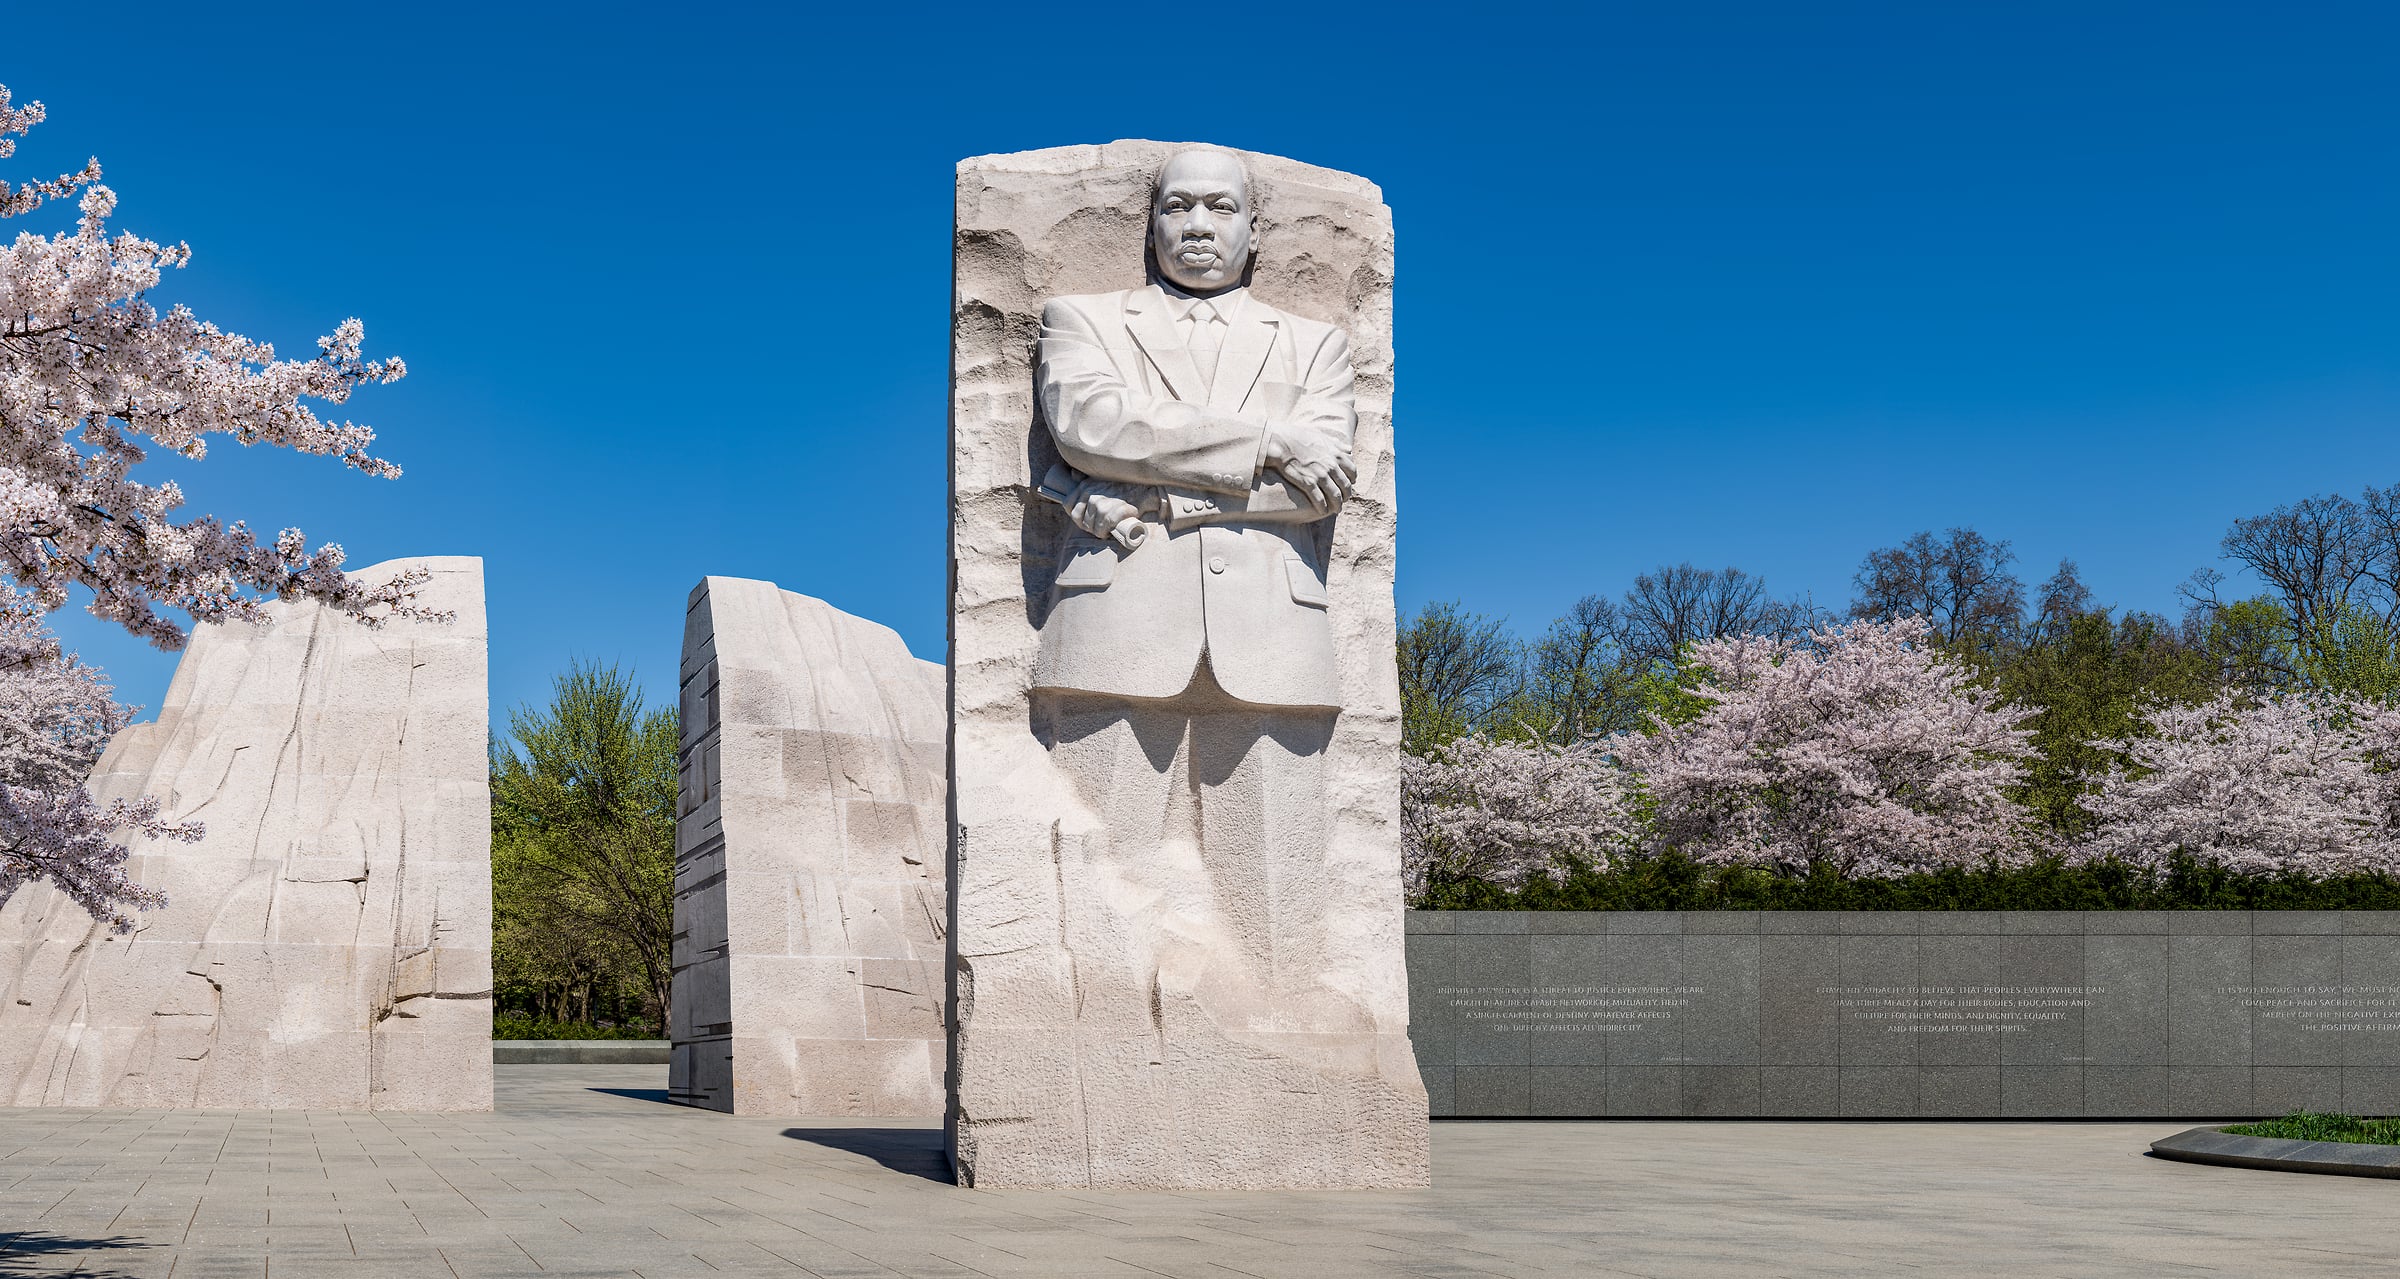 790 megapixels! A very high resolution, large-format VAST photo print of the Martin Luther King, Jr. Memorial in Washington, D.C.; photograph created by Tim Lo Monaco on the National Mall in Washington, D.C.